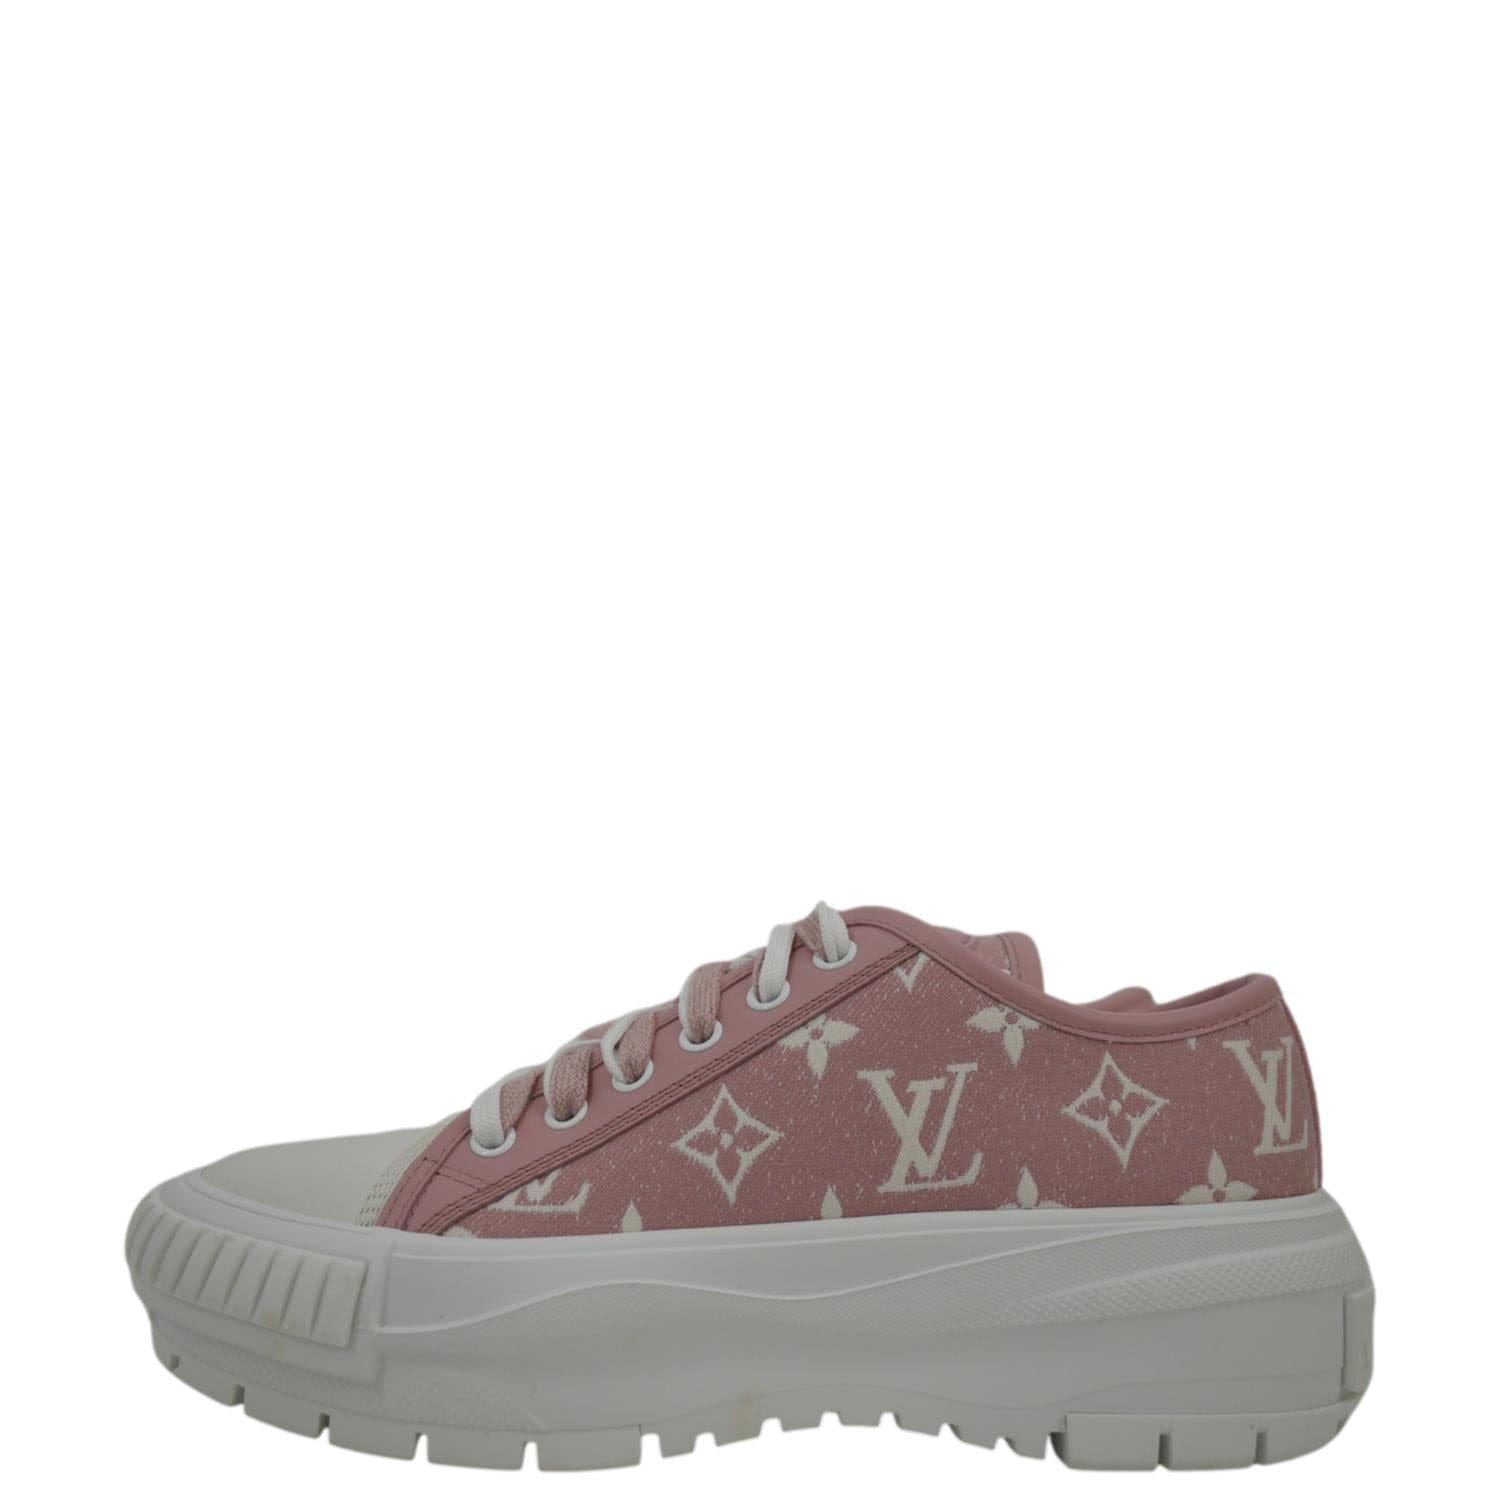 white and pink louis vuitton sneakers